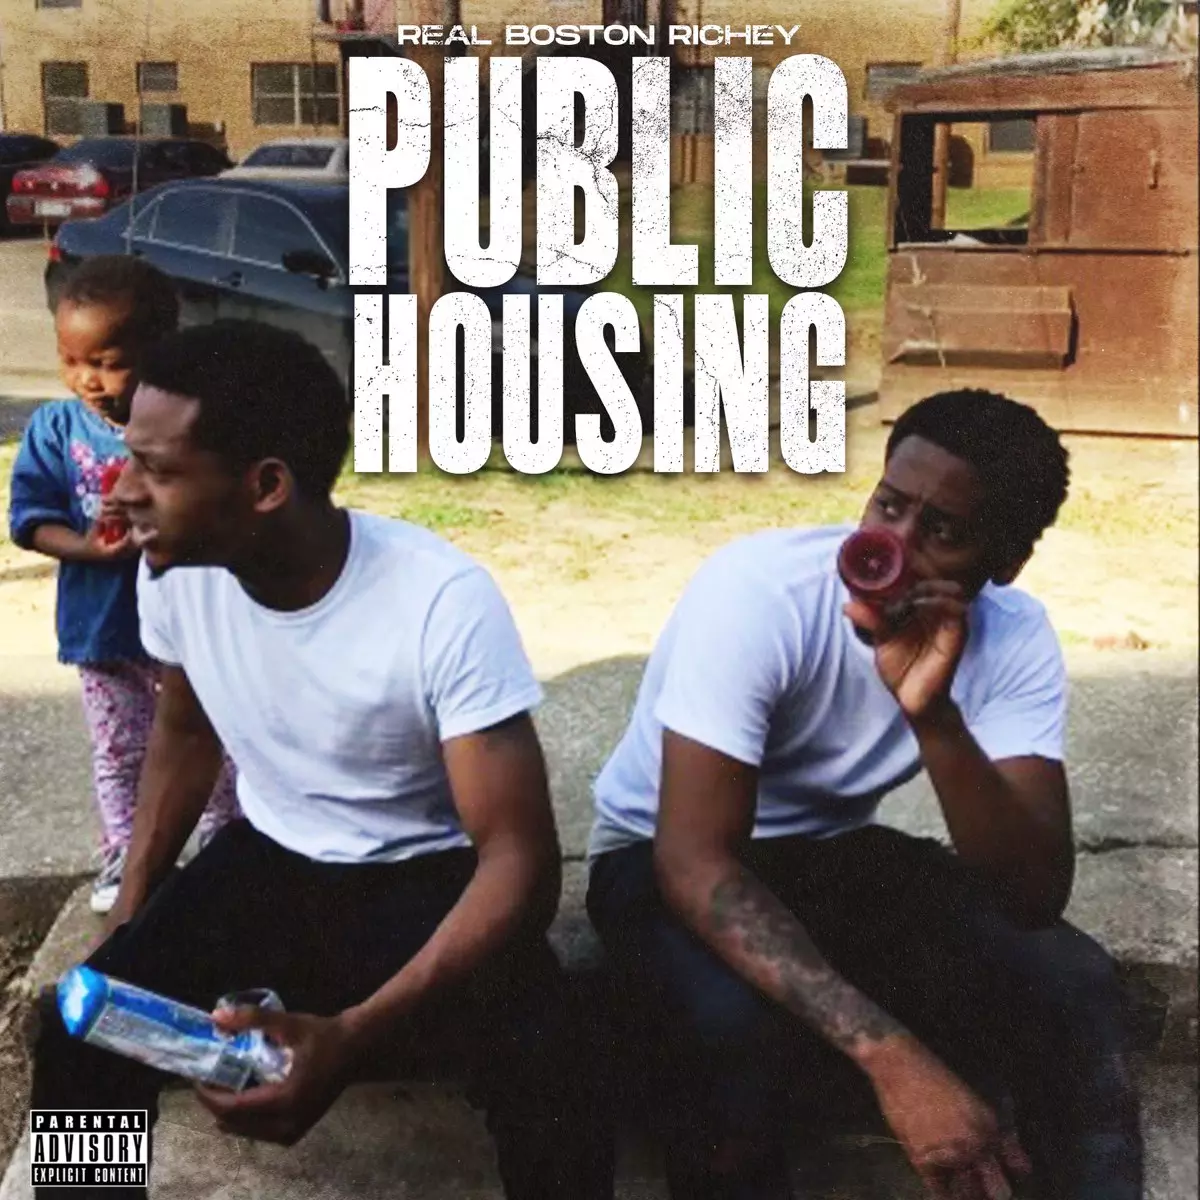 Public Housing by Real Boston Richey on Apple Music